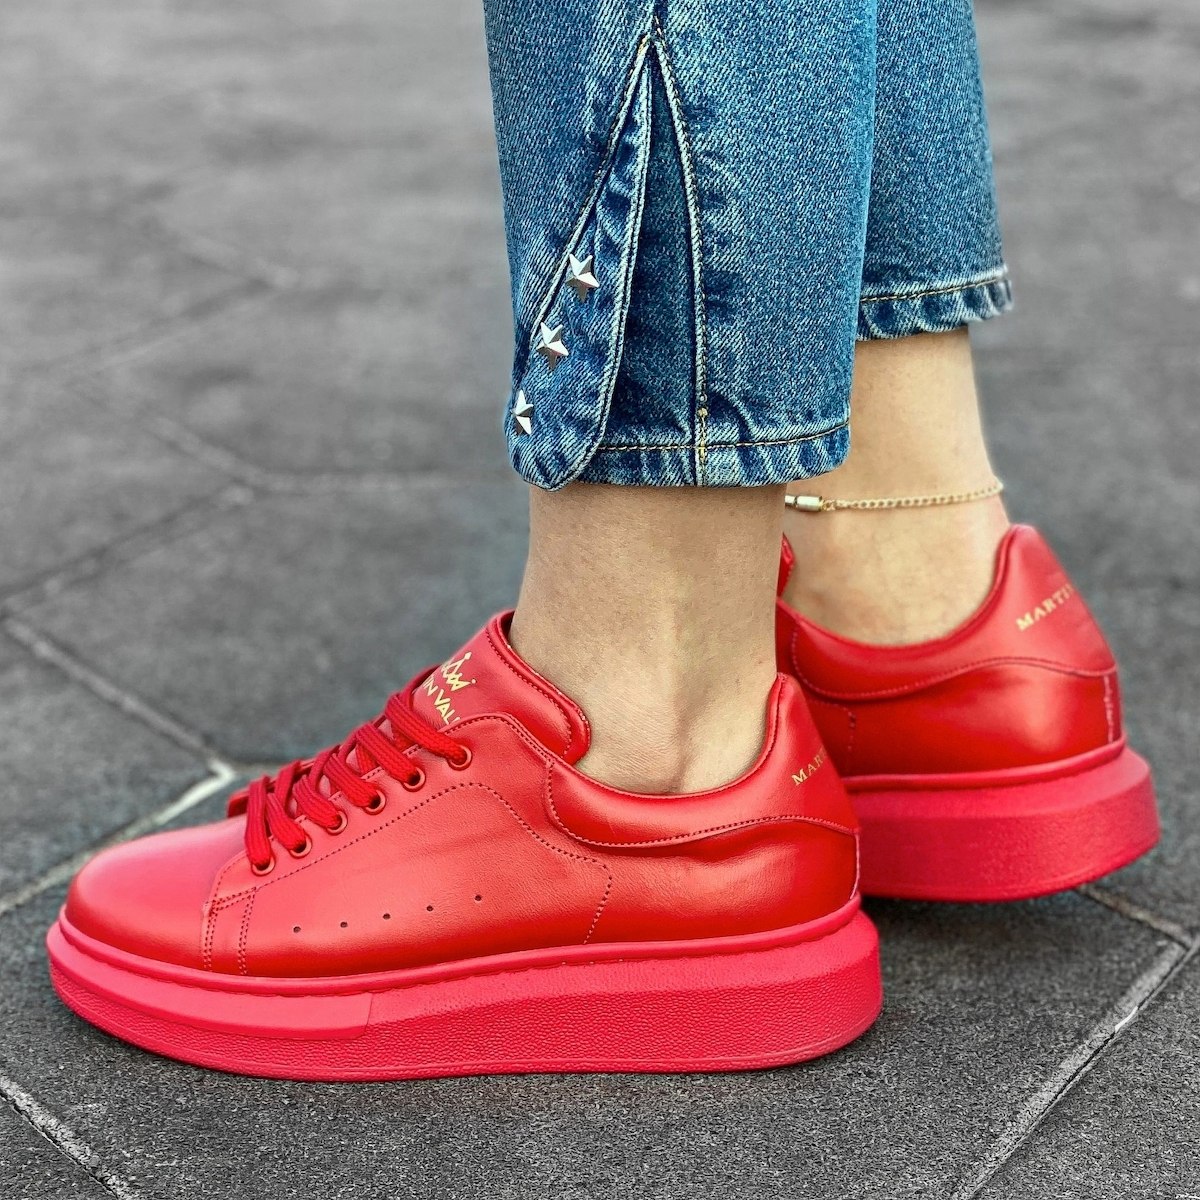 Woman's Hype Sole Sneakers In Full Red - 3